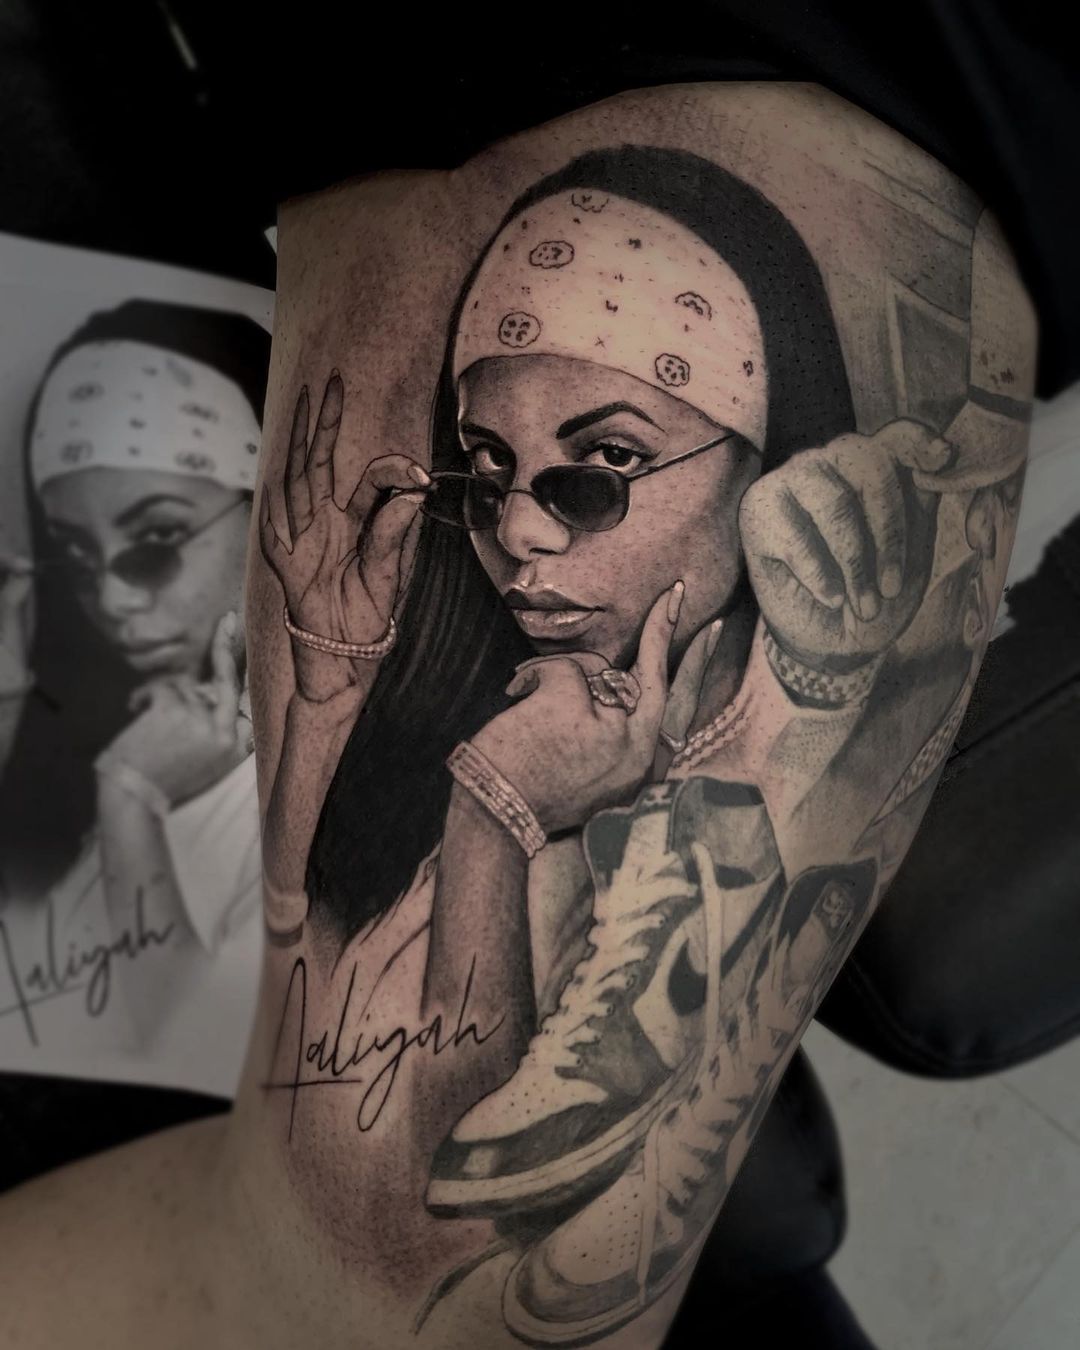 Killer Ink Tattoo on X: "Black and grey portrait of #Aaliyah from David Garcia using #killerinktattoo supplies! #killerink #tattoo #tattoos #bodyart #ink #tattooartist #tattooink #tattooart #blackandgrey #blackandgreytattoo #aaliyahtattoo ...